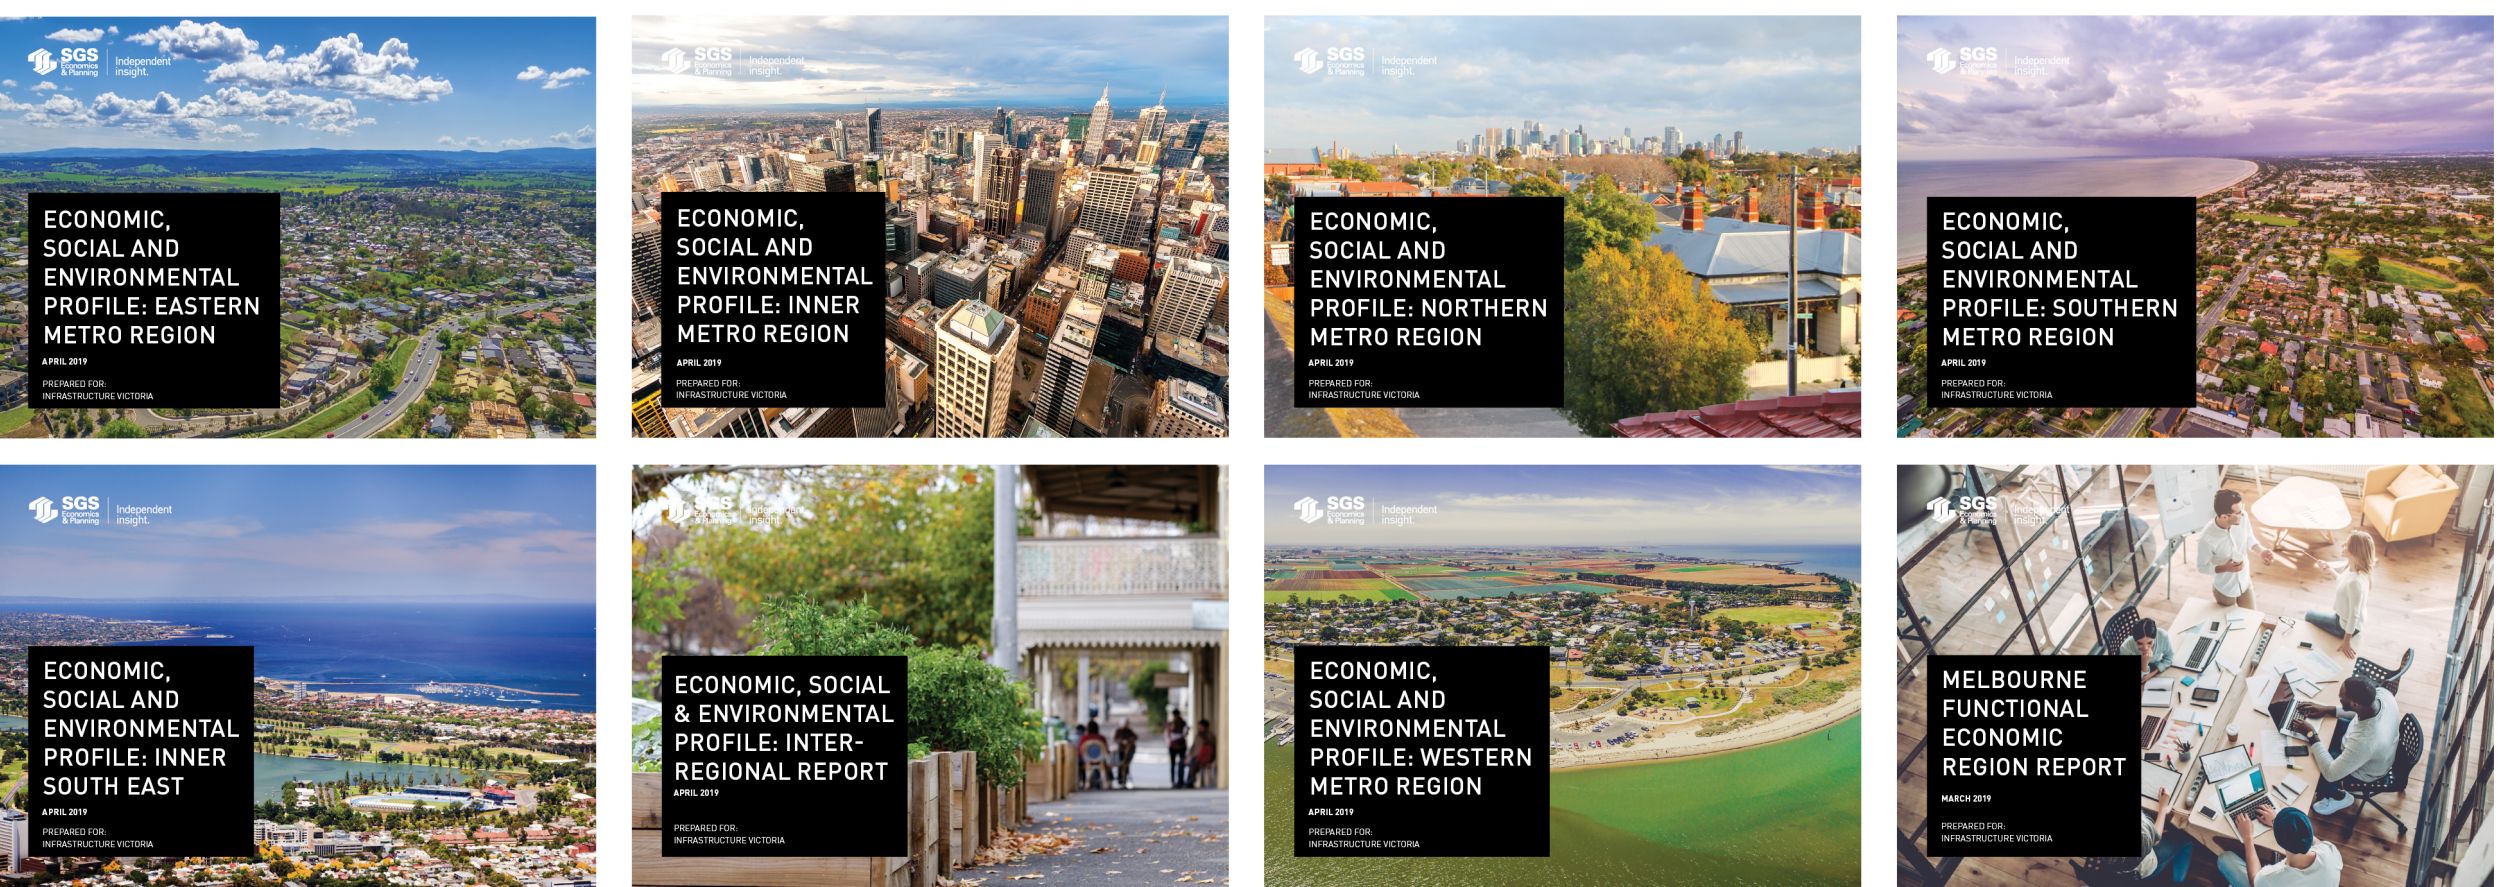 SGS Economics and Planning Spatial profile covers